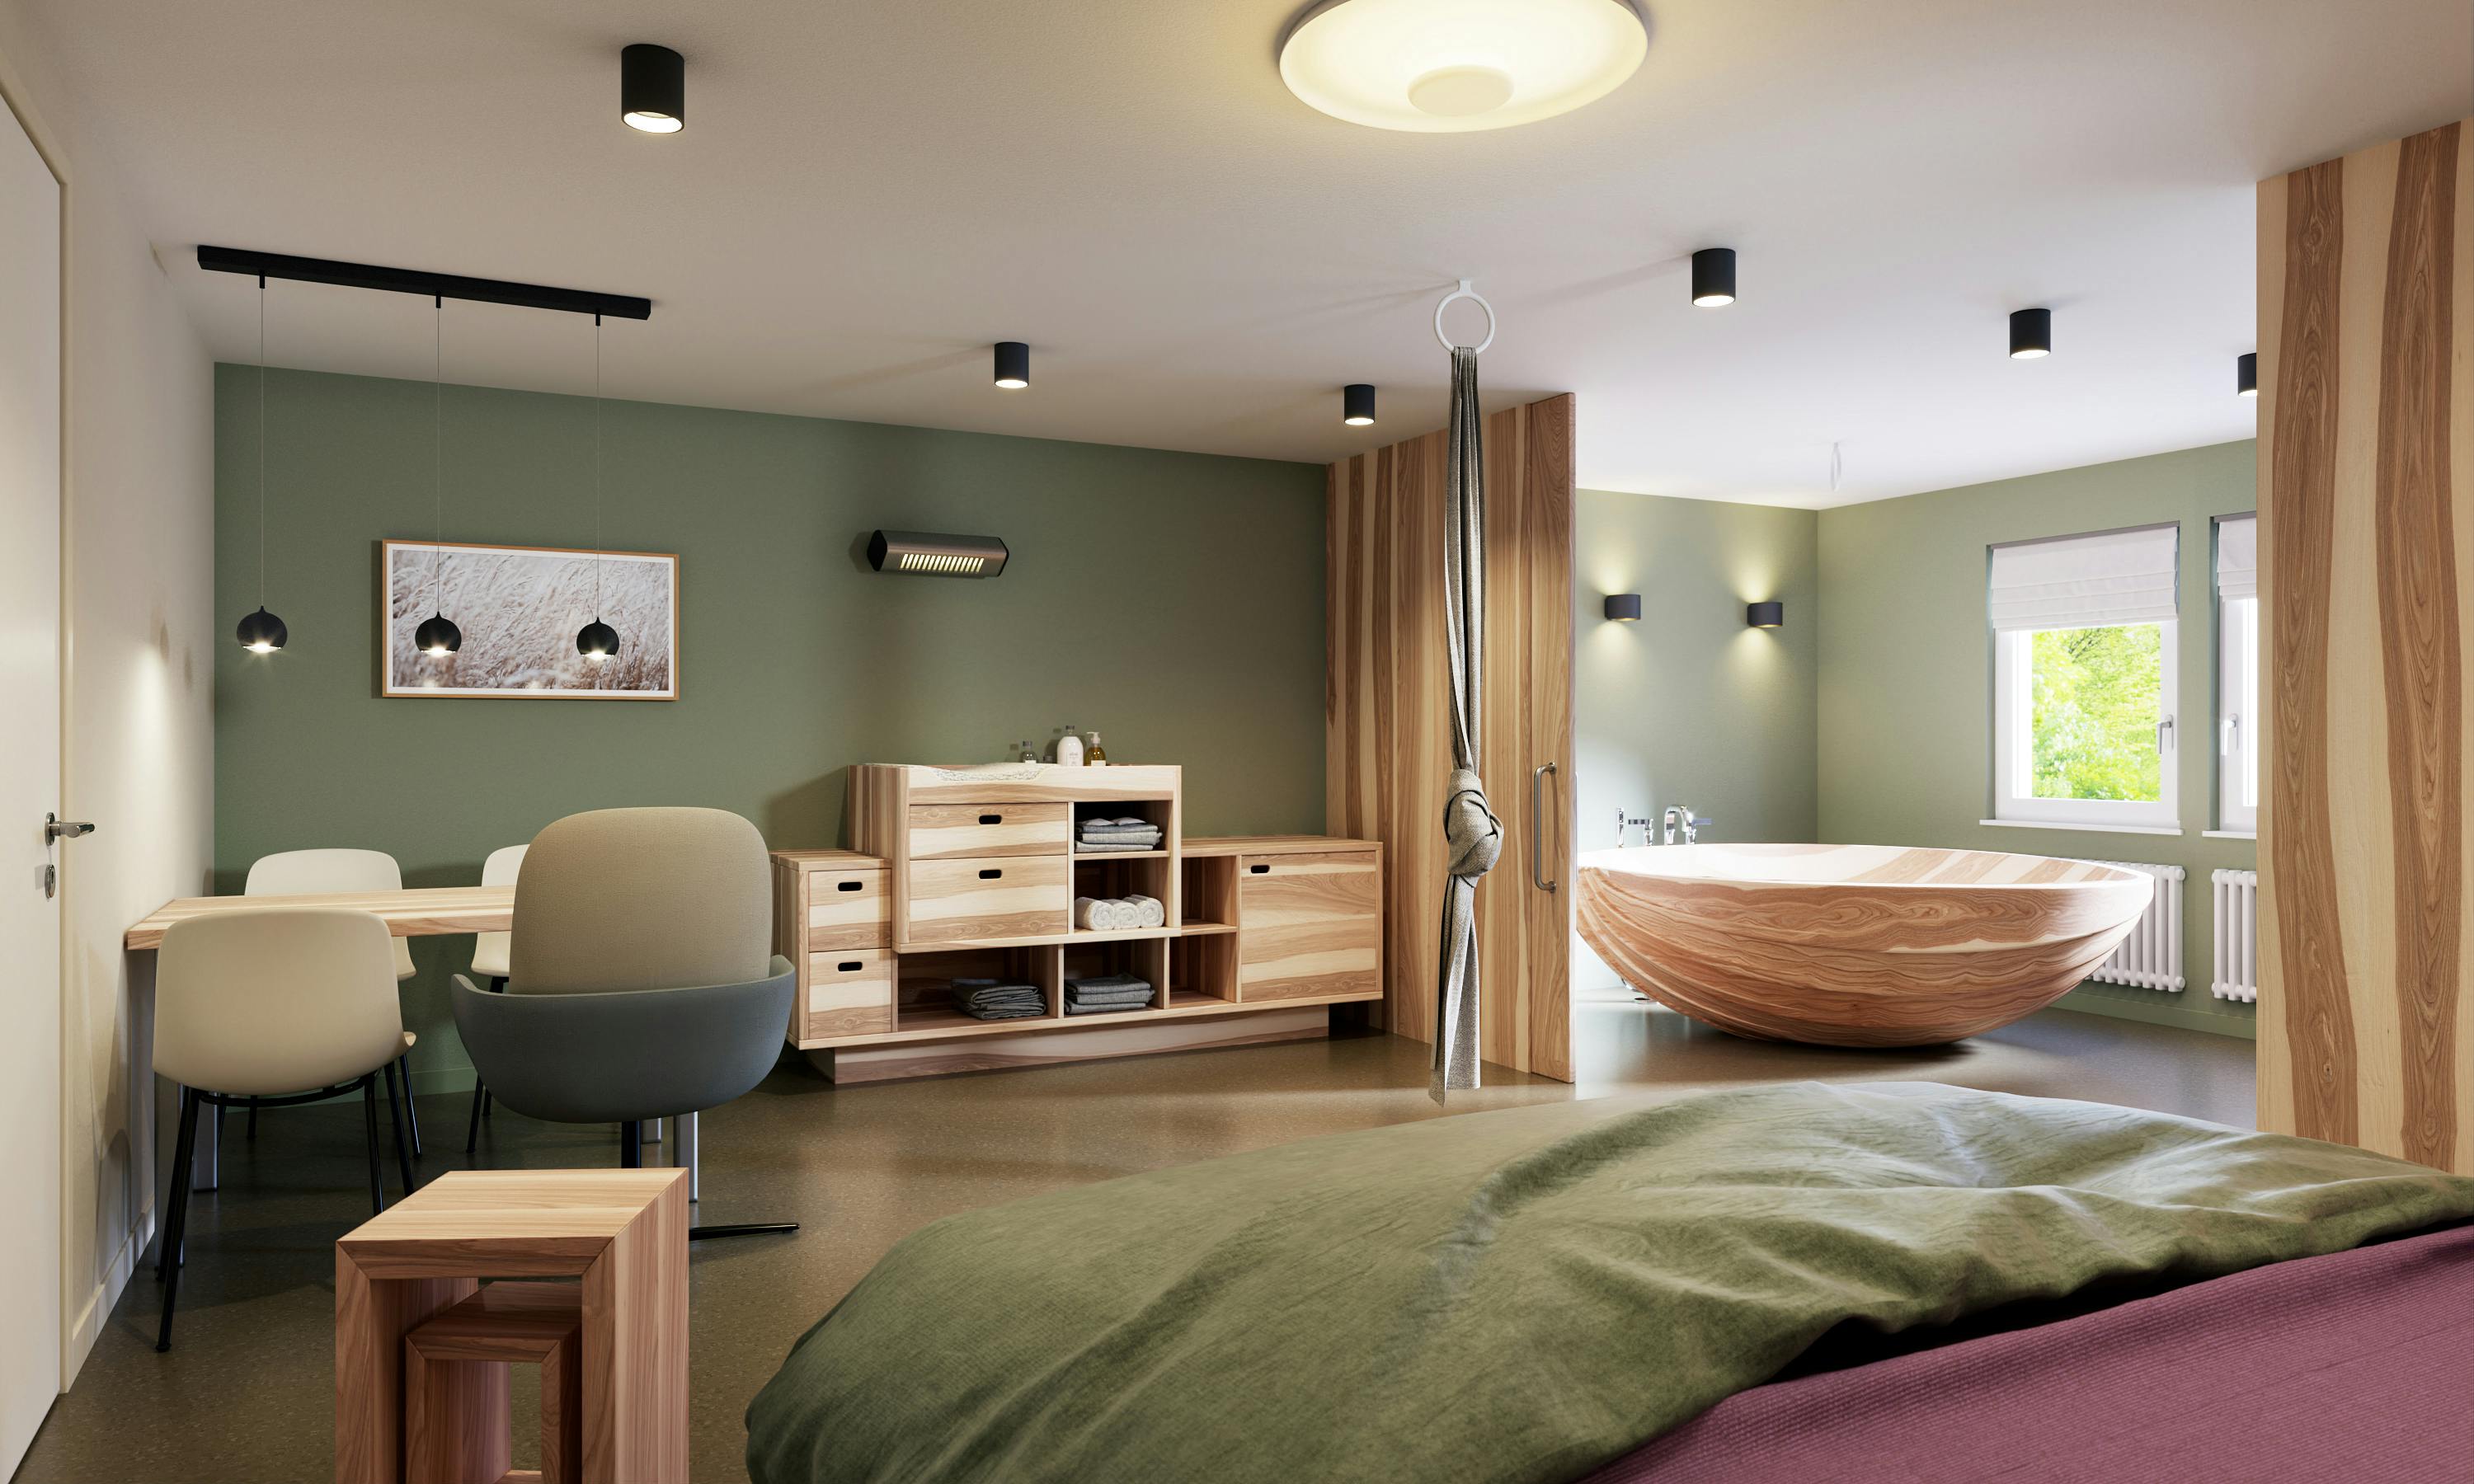 Modern bedroom with wooden furniture and adjoining bathroom.